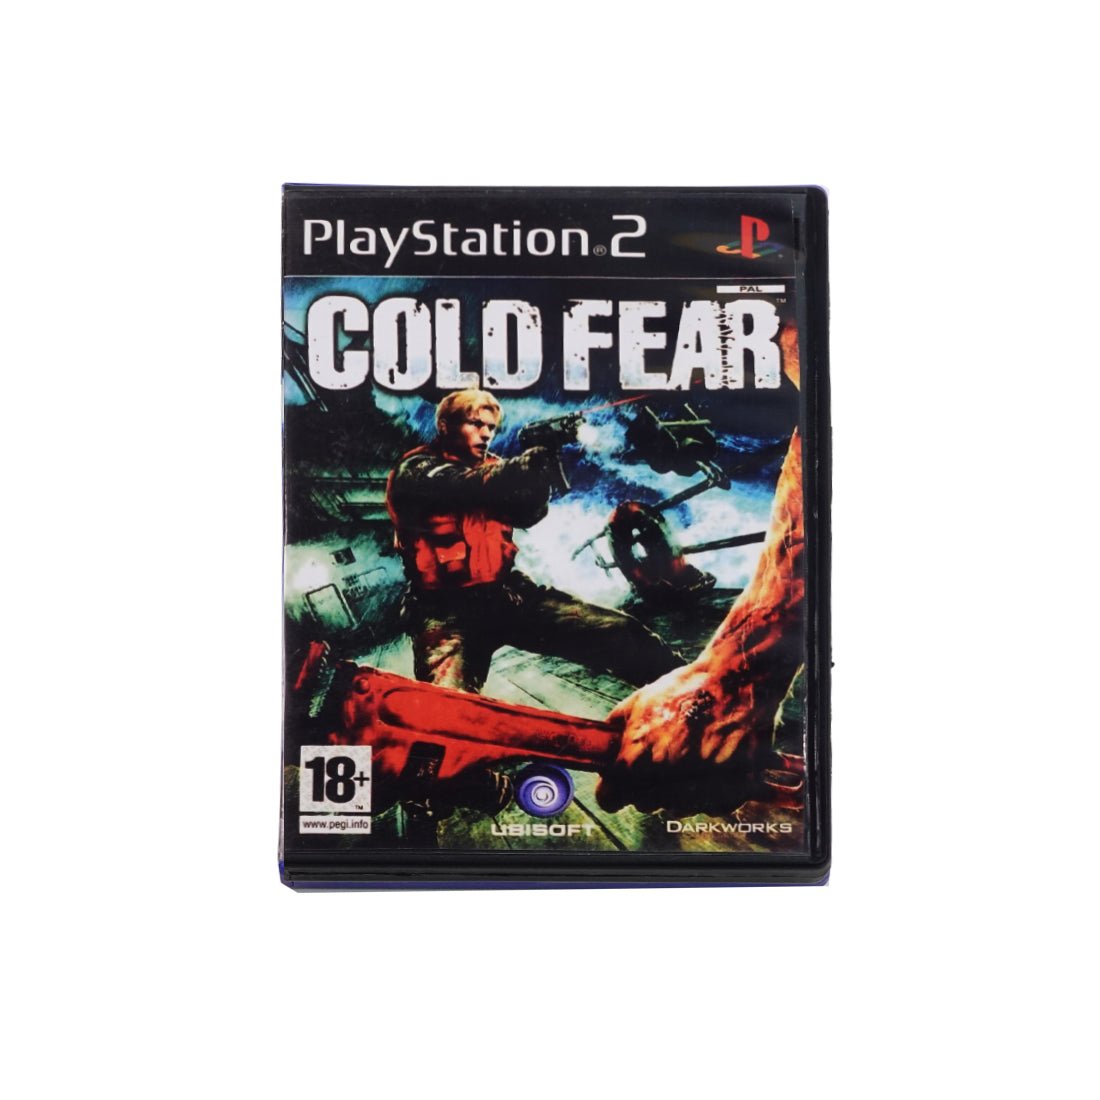 (Pre-Owned) Cold Fear - PlayStation 2 - Store 974 | ستور ٩٧٤